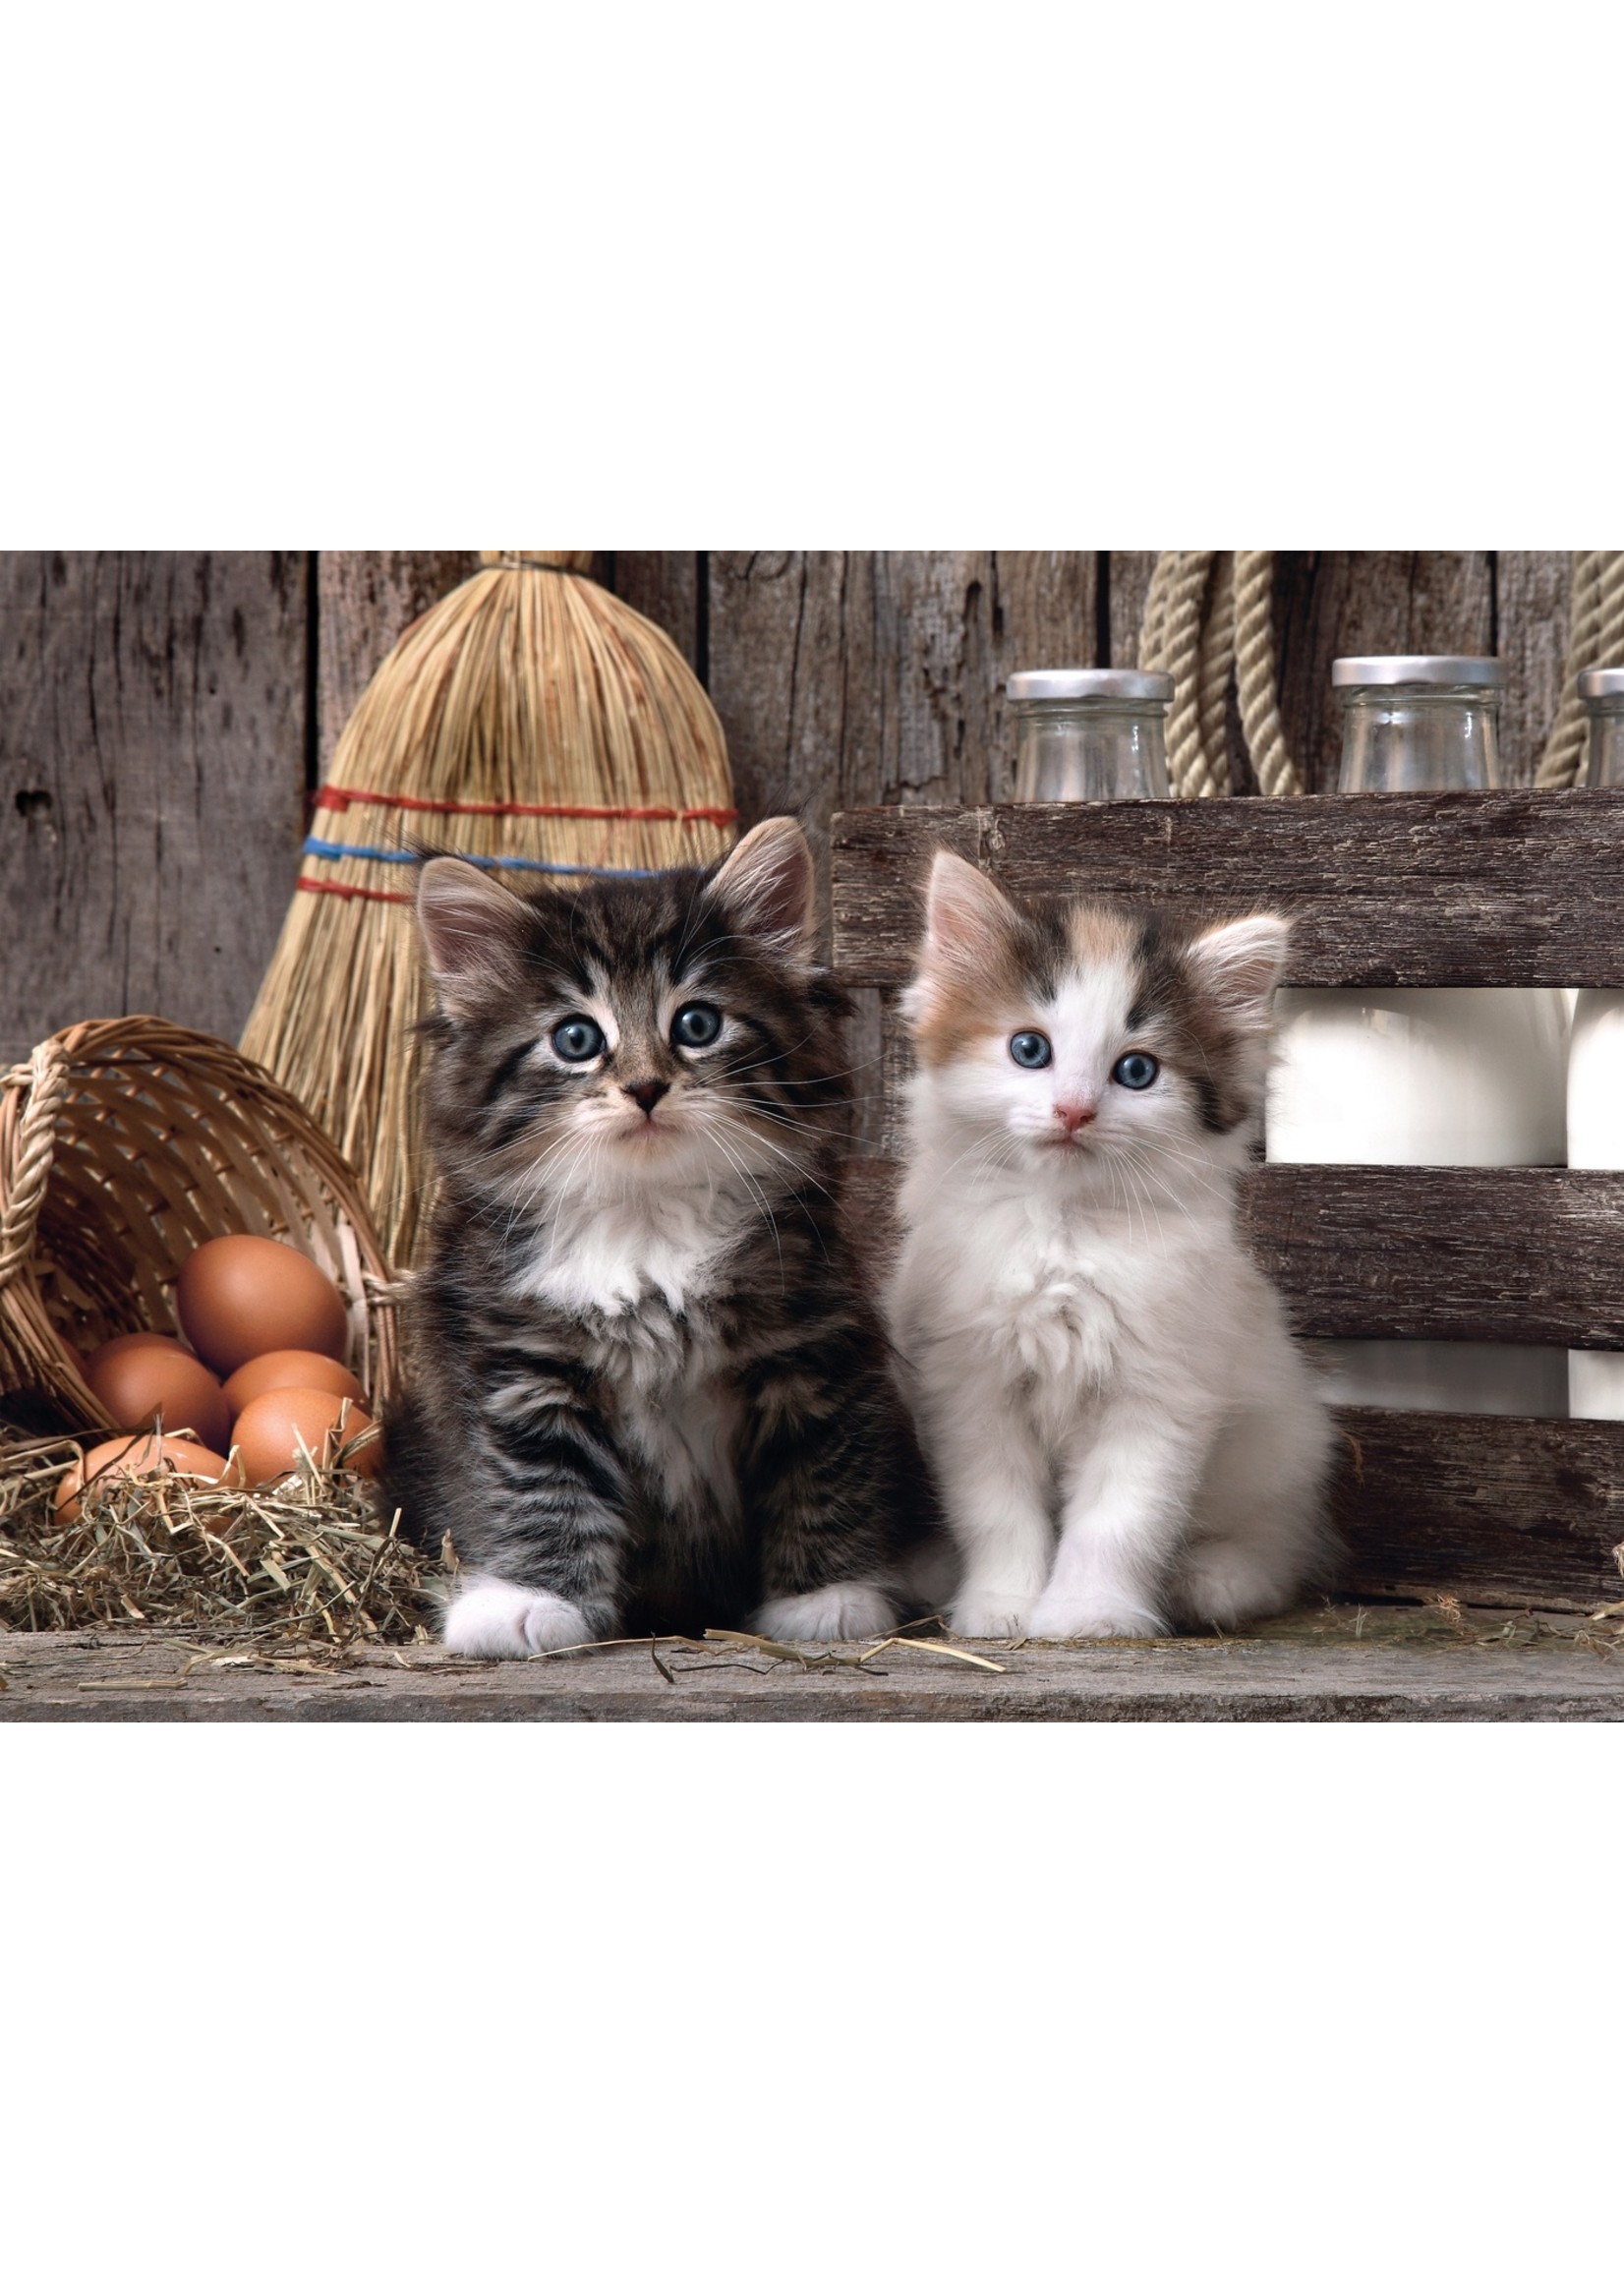 Clementoni Lovely Kittens - 1000 Piece Puzzle